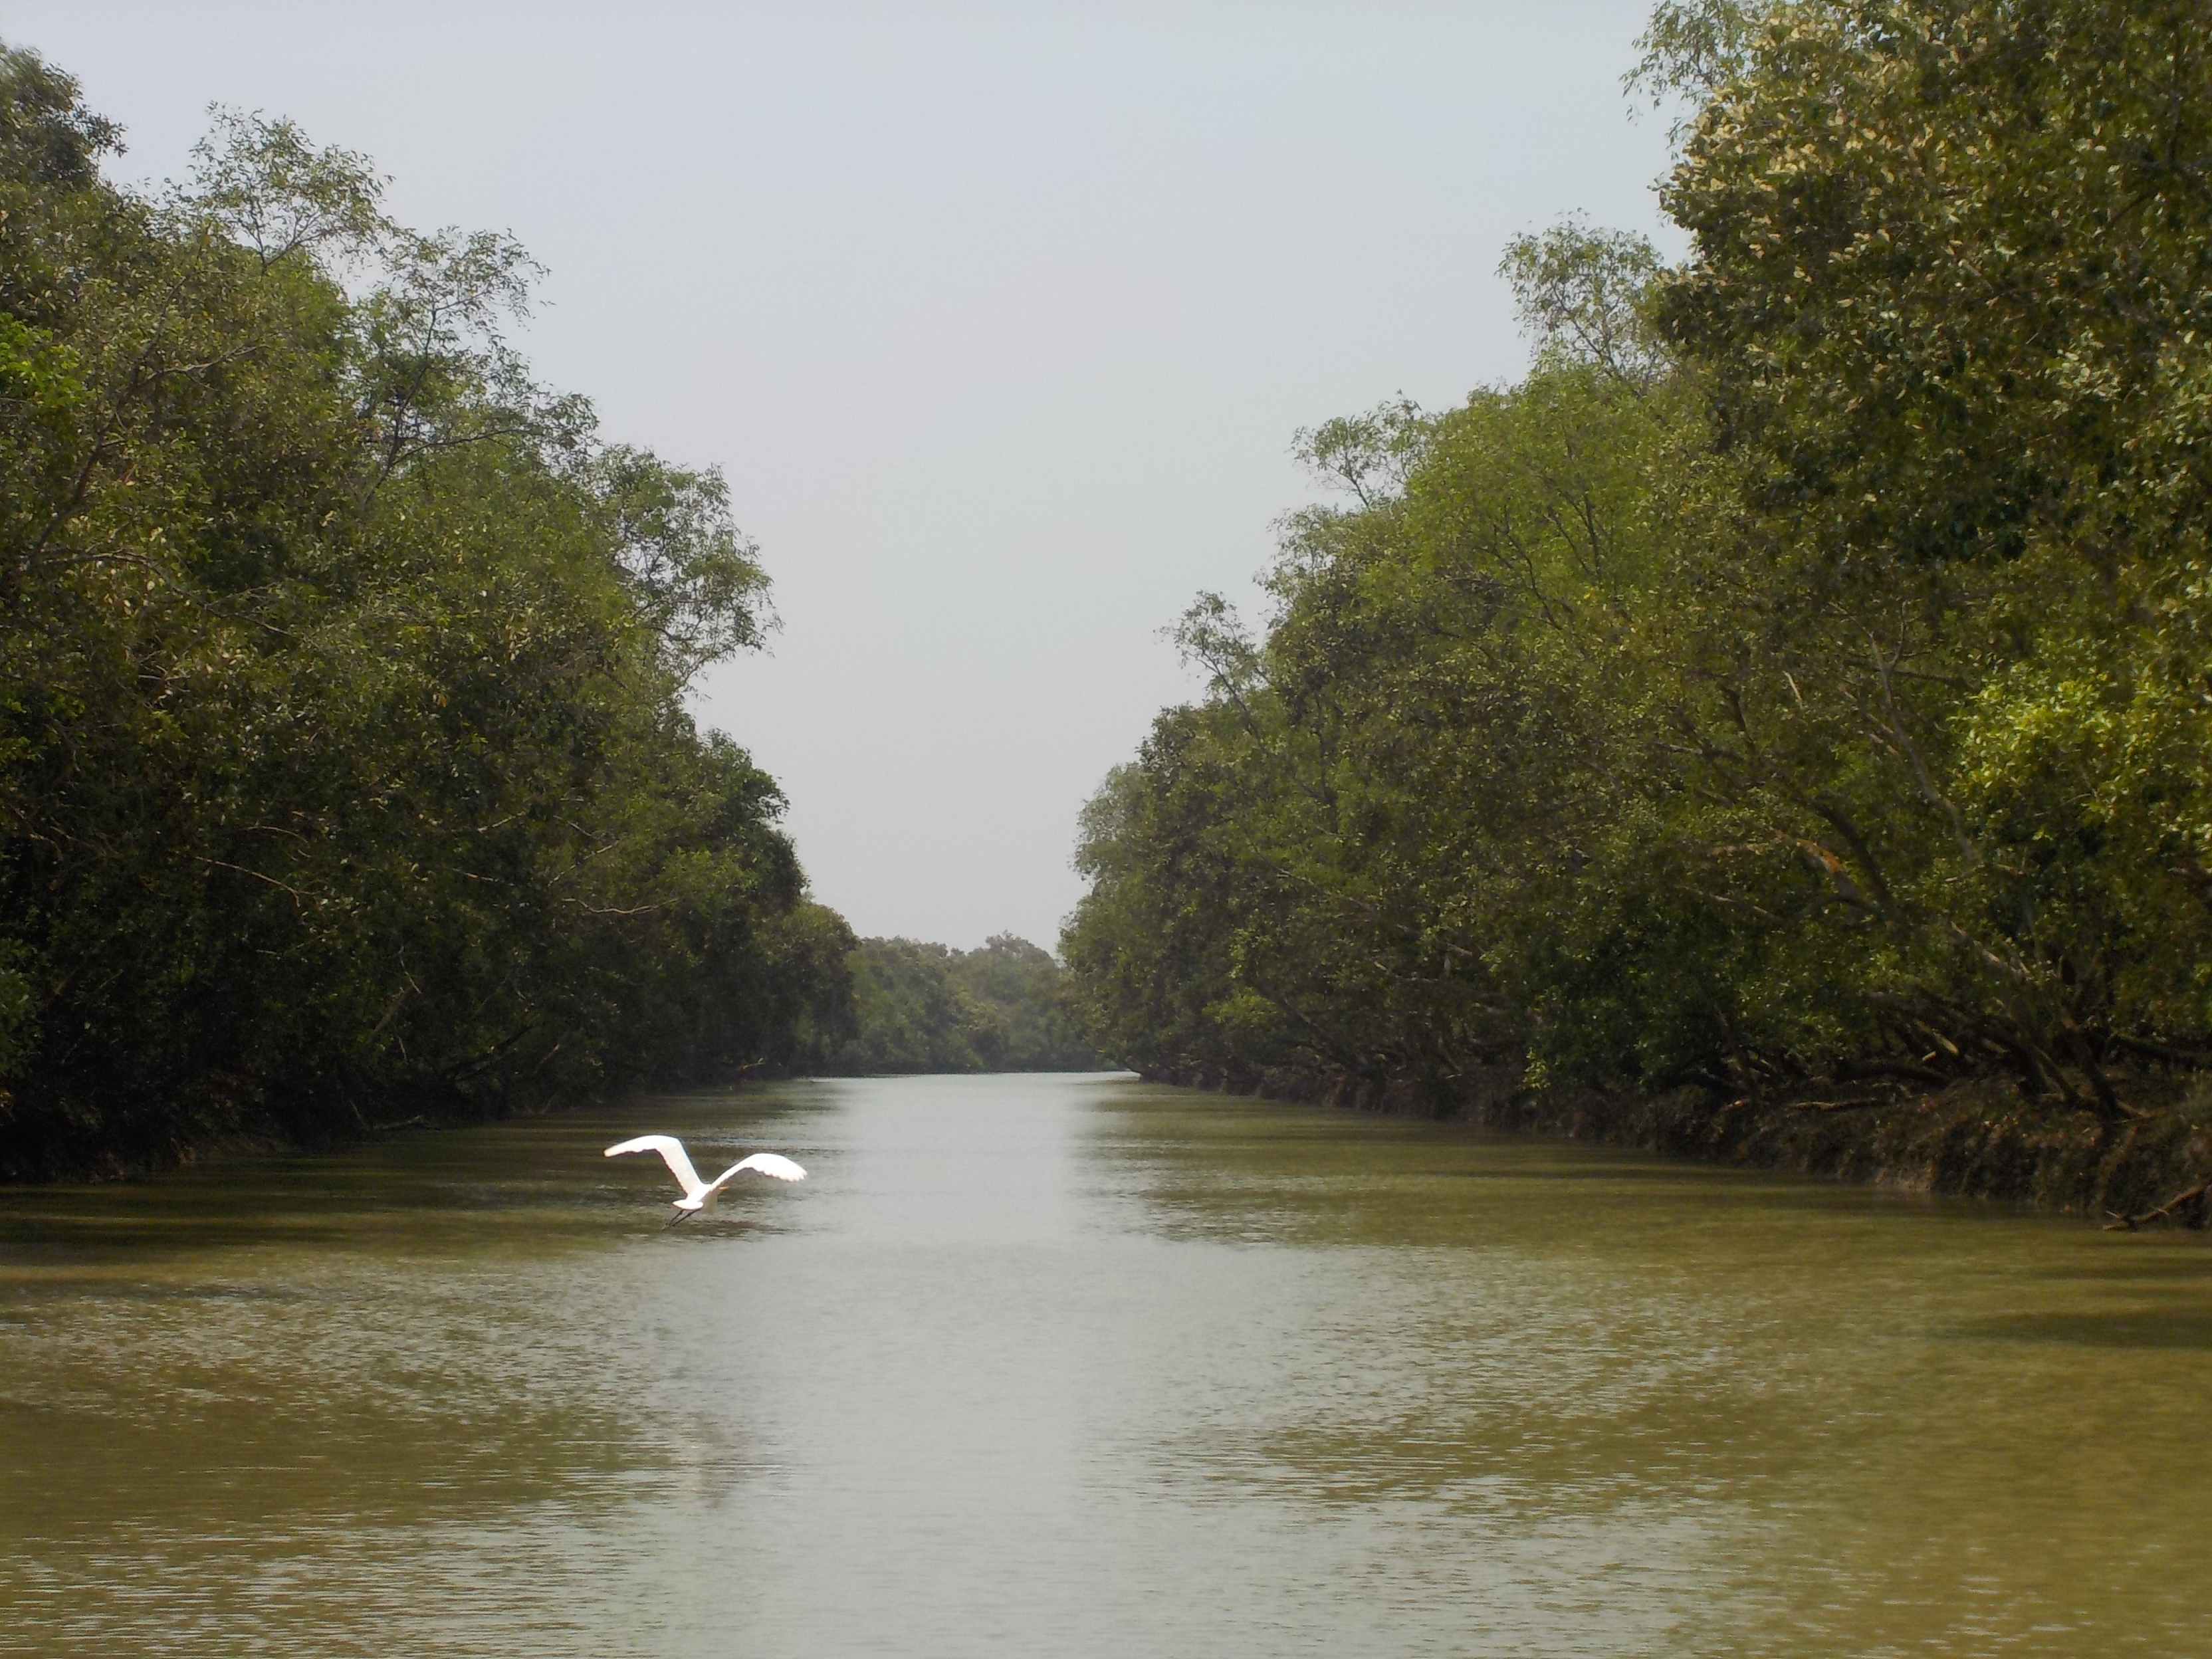 A large white bird, possibly a heron, flies ahead just over a river-like body of water. Trees and vegetation line either side of the water. The image was taken in the Bhitarkanika mangroves.